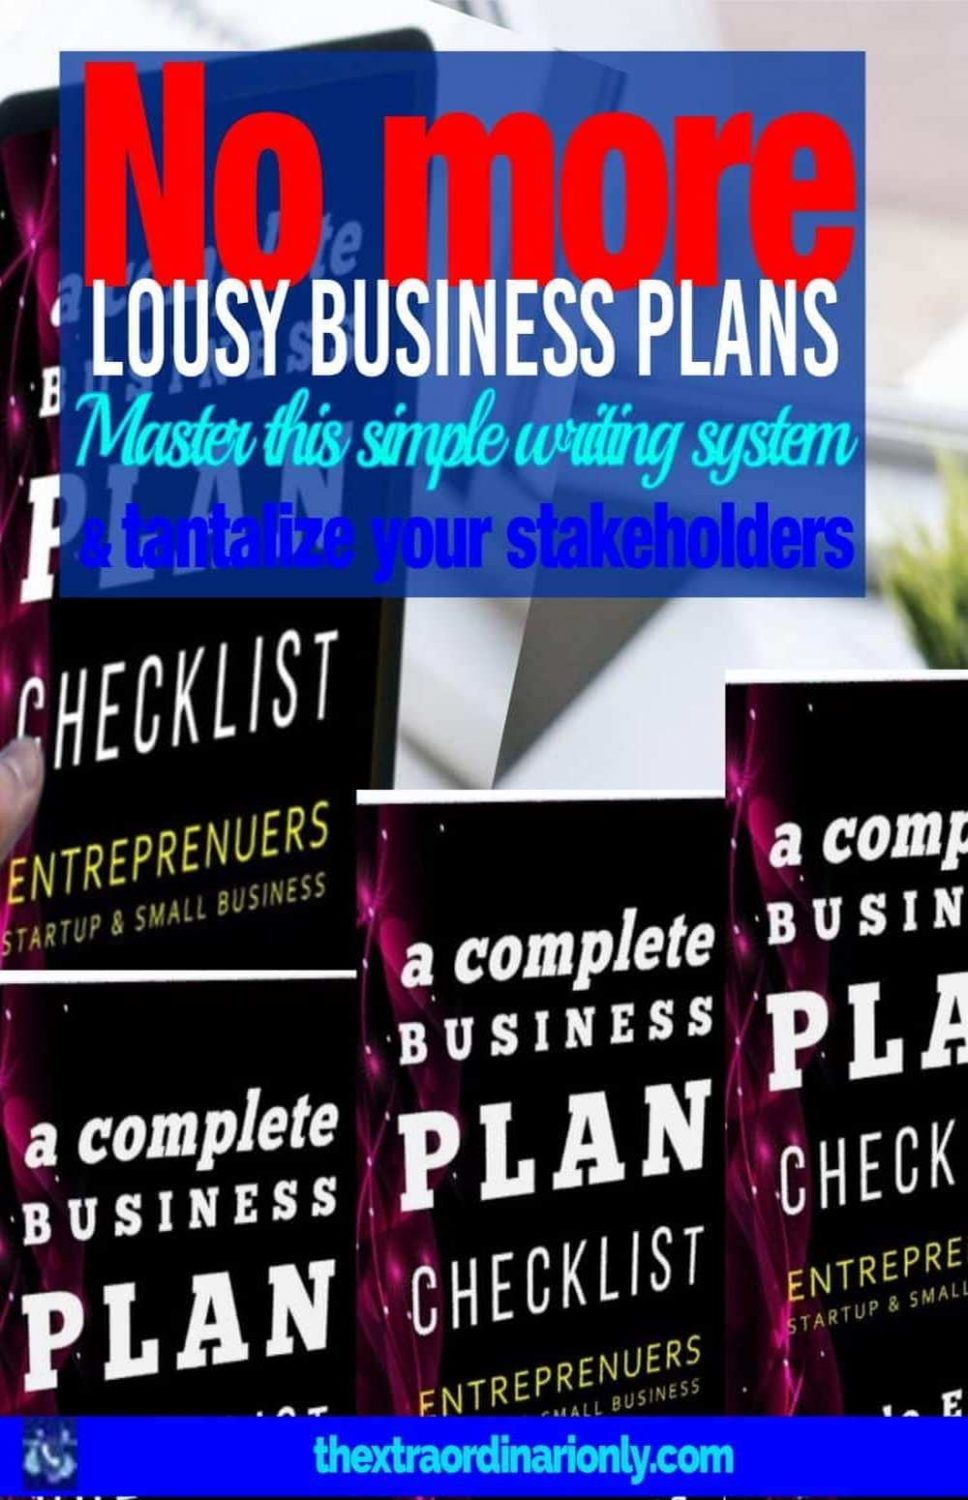 Best business plan template checklist - no more lousy bogus business plans. Tantalize your stakeholders